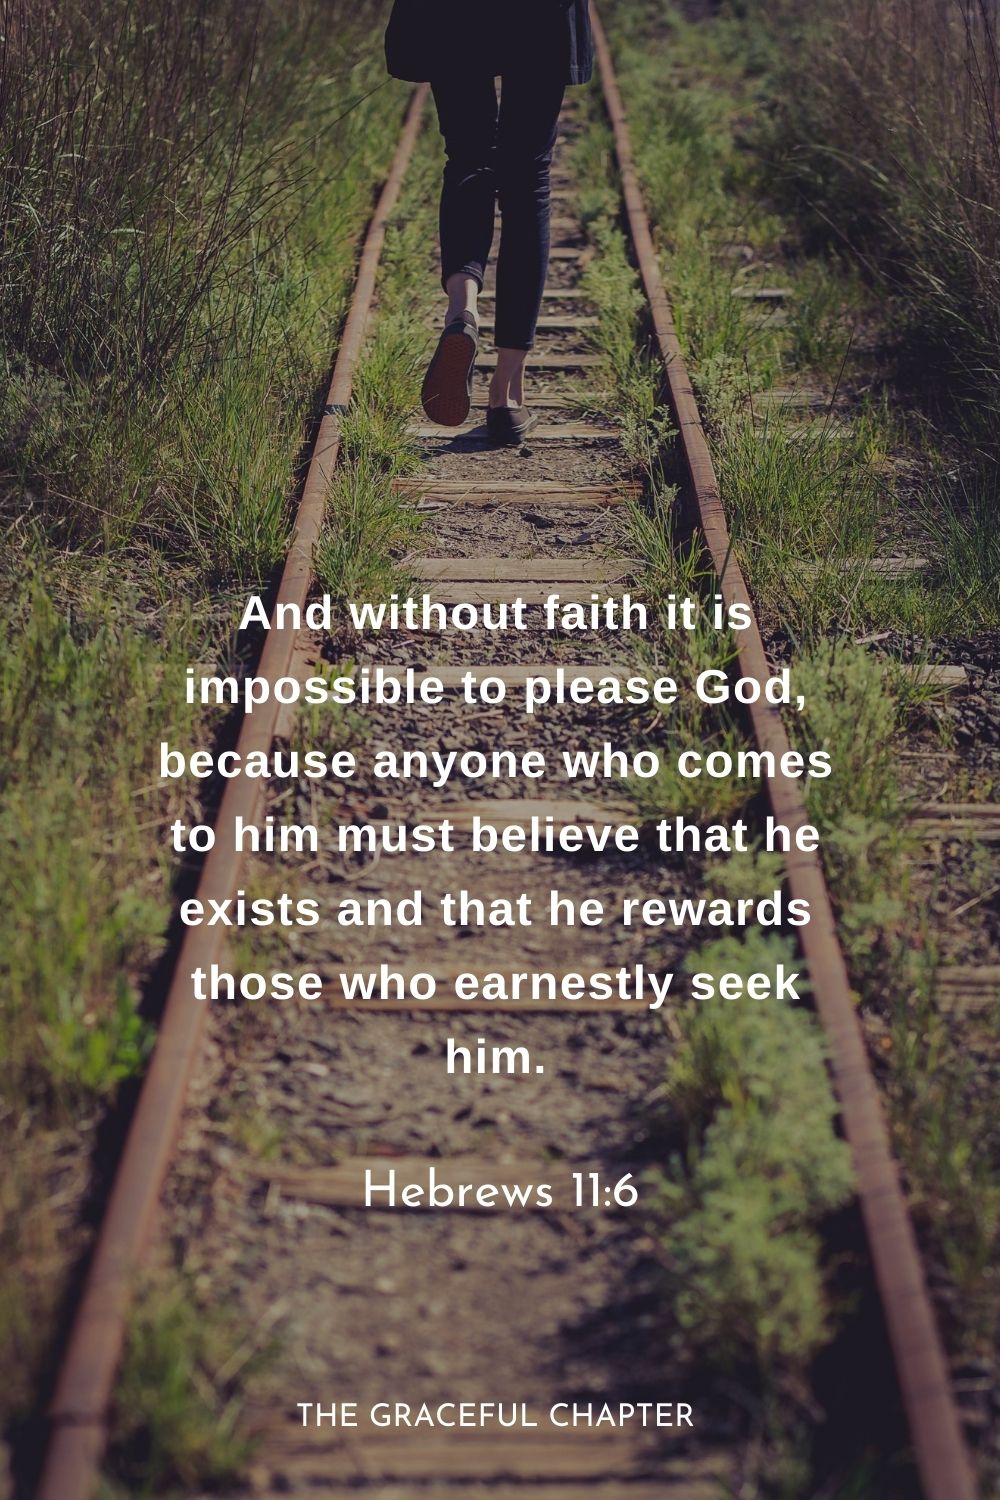 And without faith it is impossible to please God, because anyone who comes to him must believe that he exists and that he rewards those who earnestly seek him.